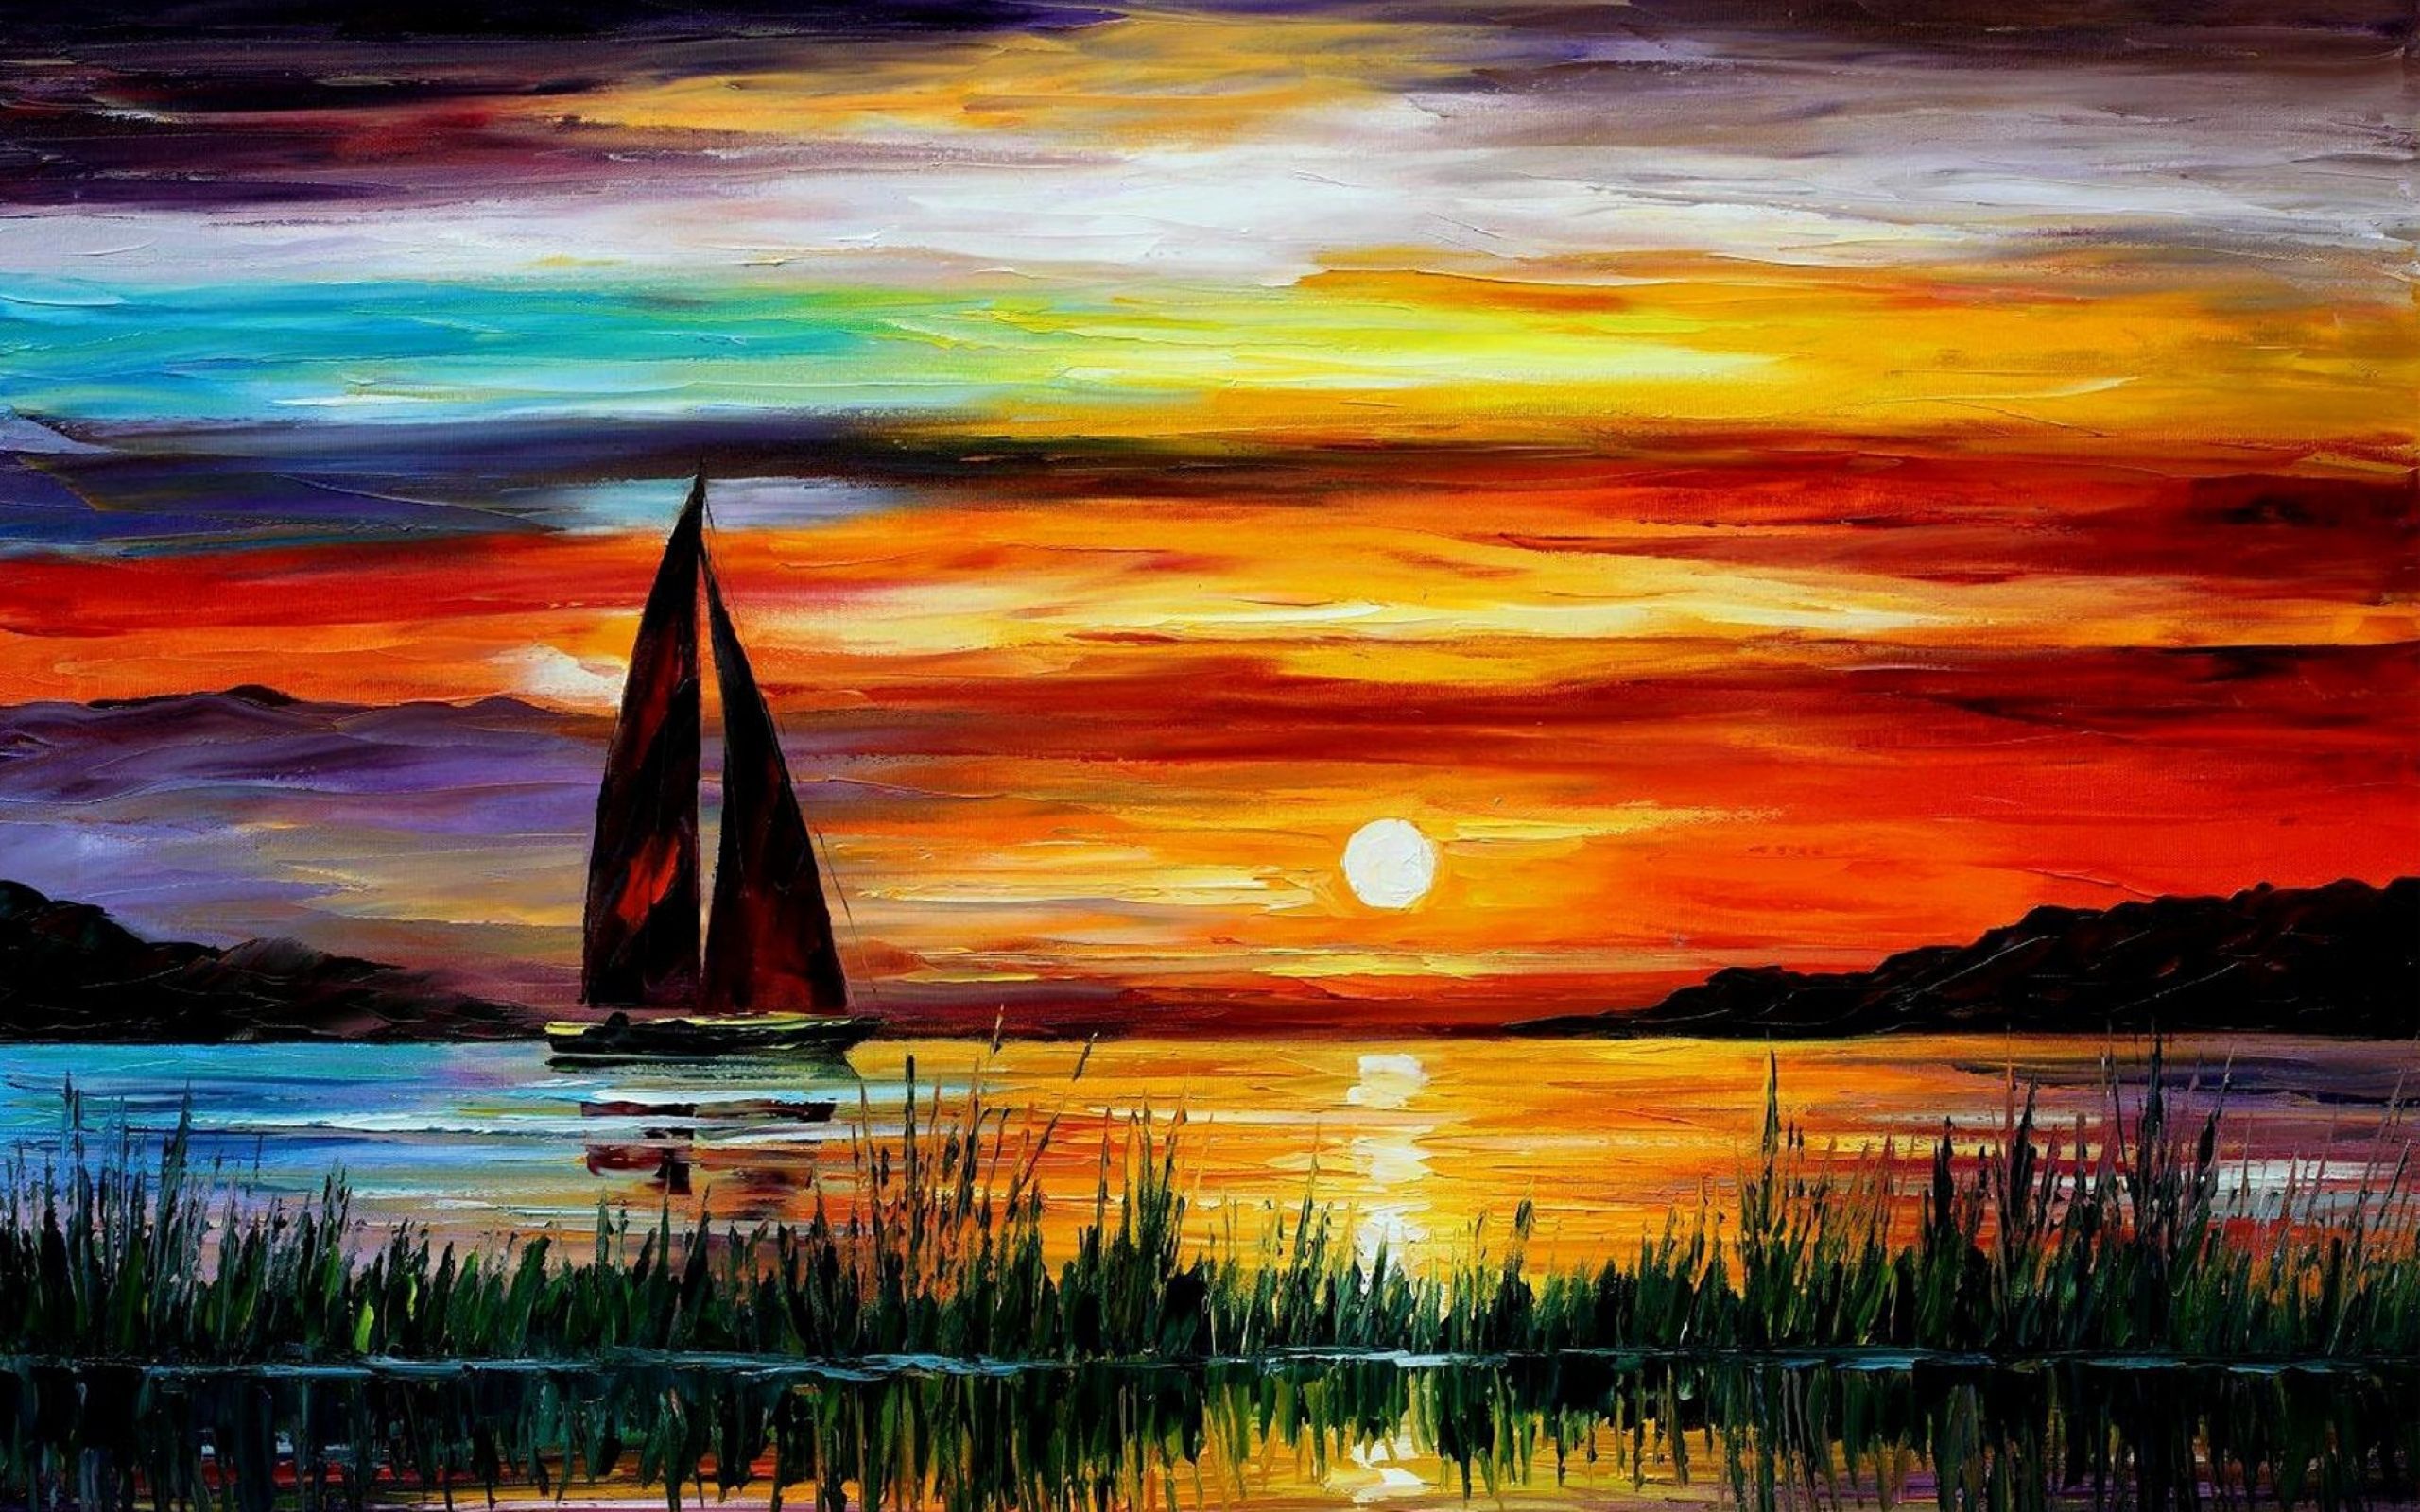 oil painting wallpaper hd